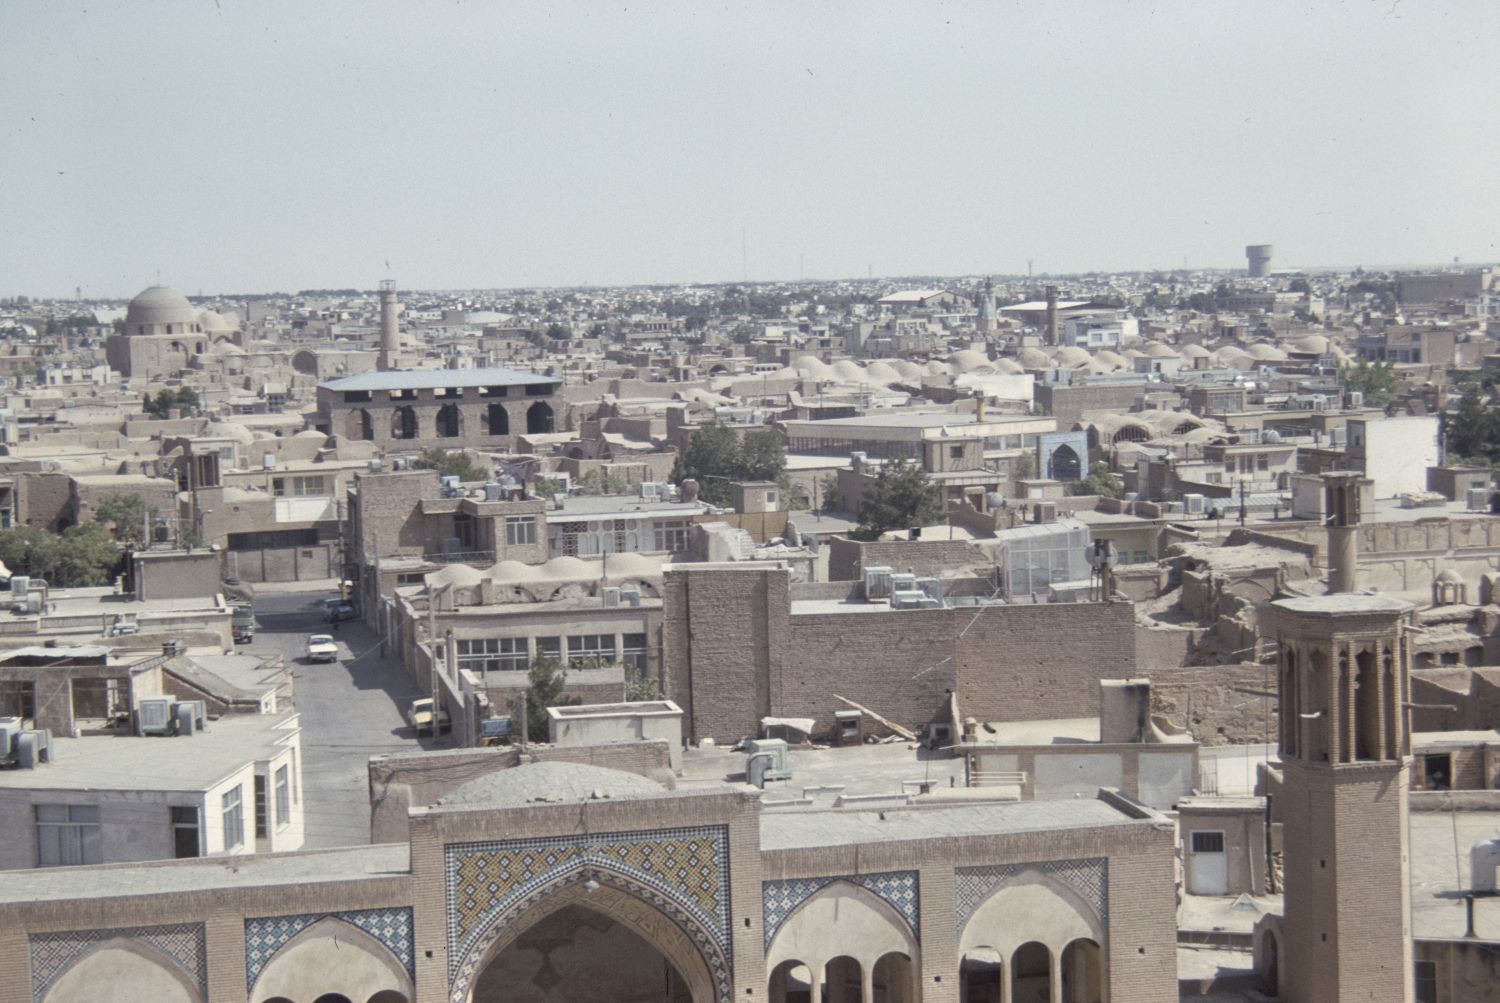 View over city facing north from the roof of the&nbsp;<a href="https://archnet.org/sites/1625" target="_blank" data-bypass="true">Aqa Buzurg Mosque</a>. Main entrance to mosque is visible in foreground.&nbsp;